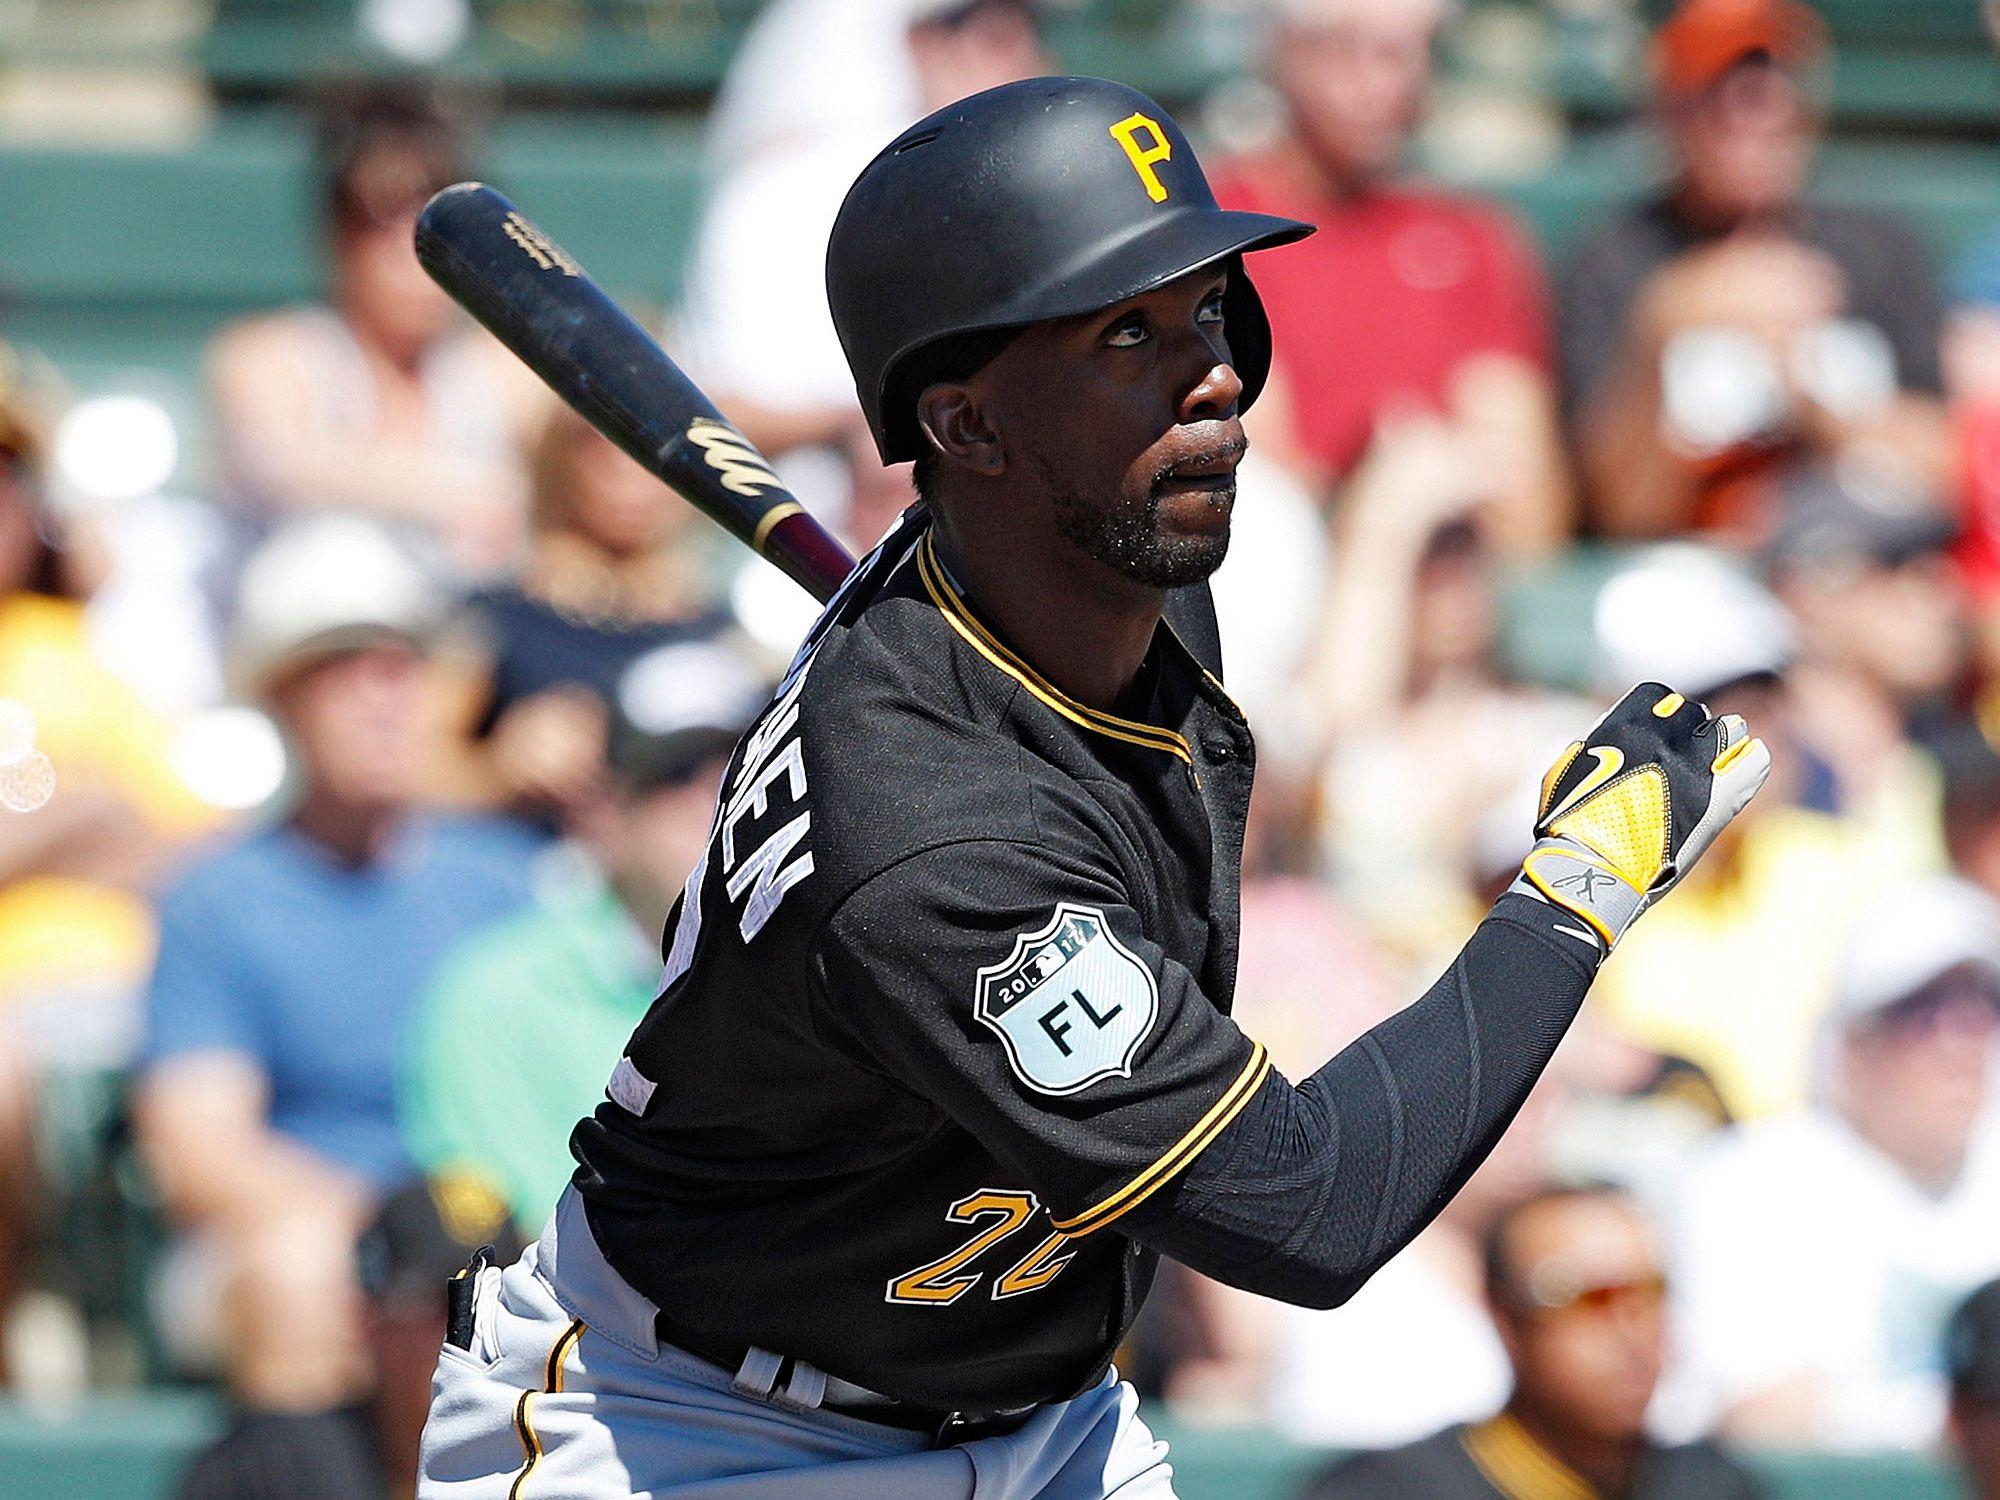 Andrew McCutchen on his 2016 struggles and plans for 2017